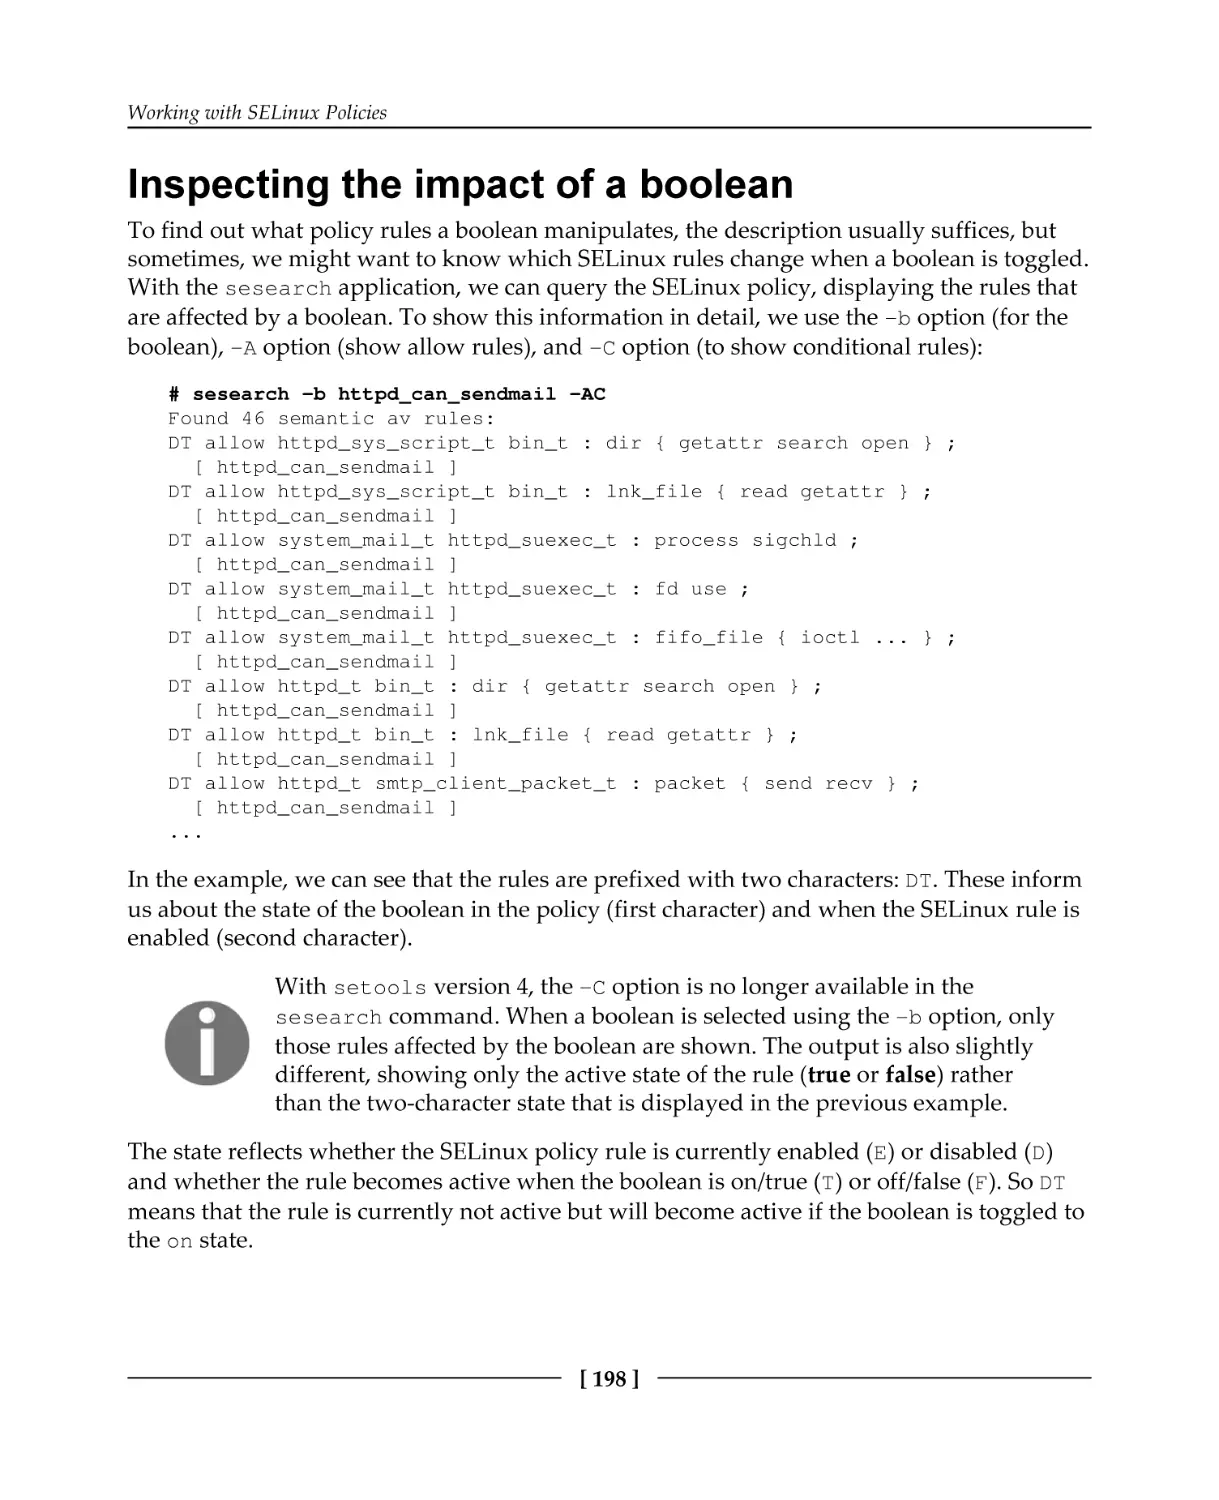 Inspecting the impact of a boolean